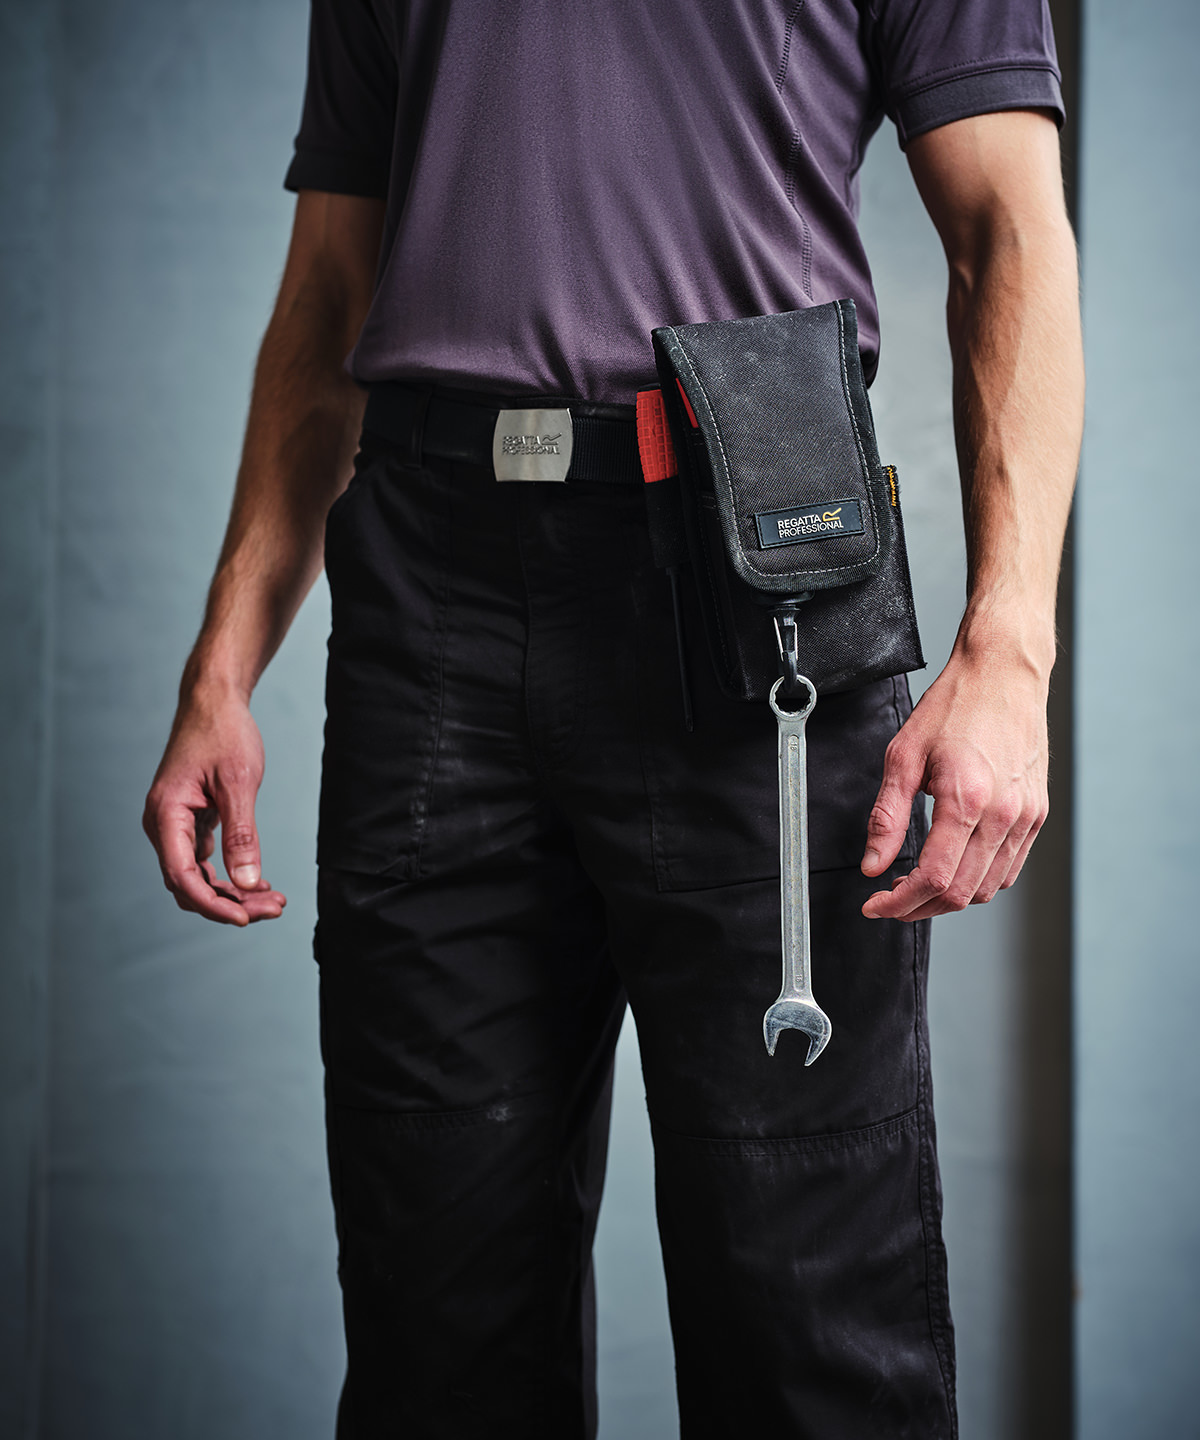 Multi-pocket tool pouch